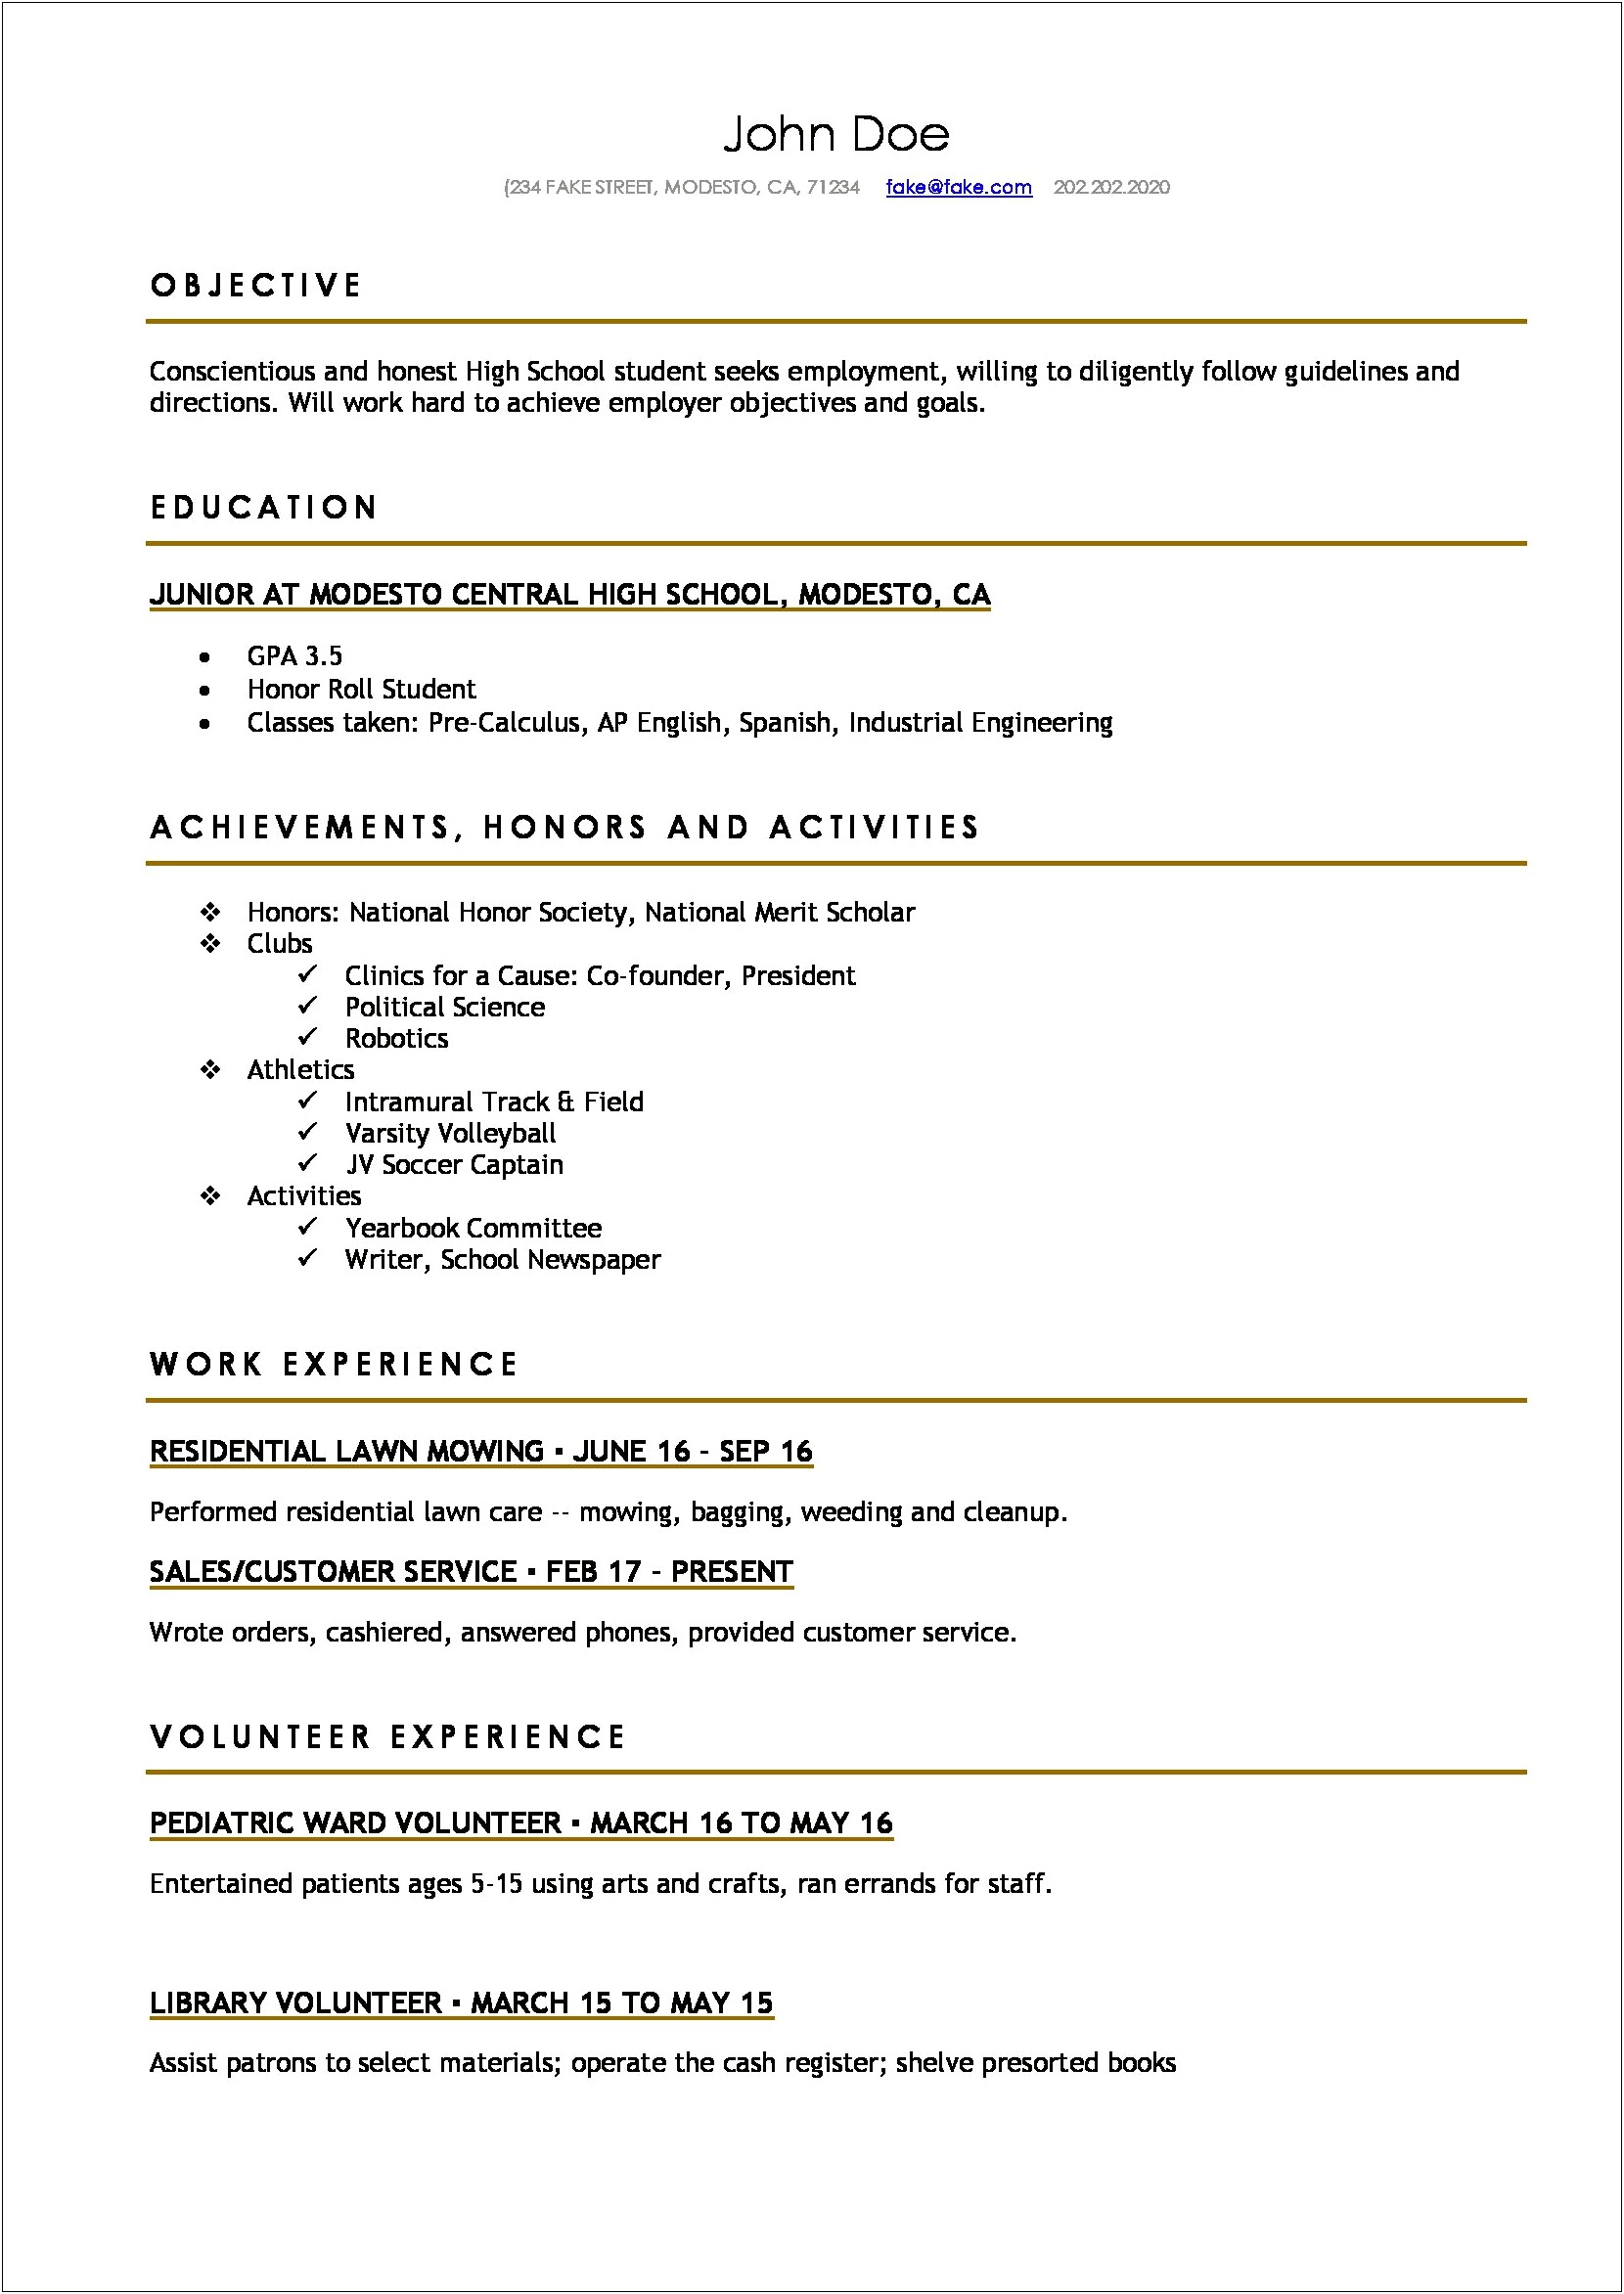 Resume Blank Templates For High School Students